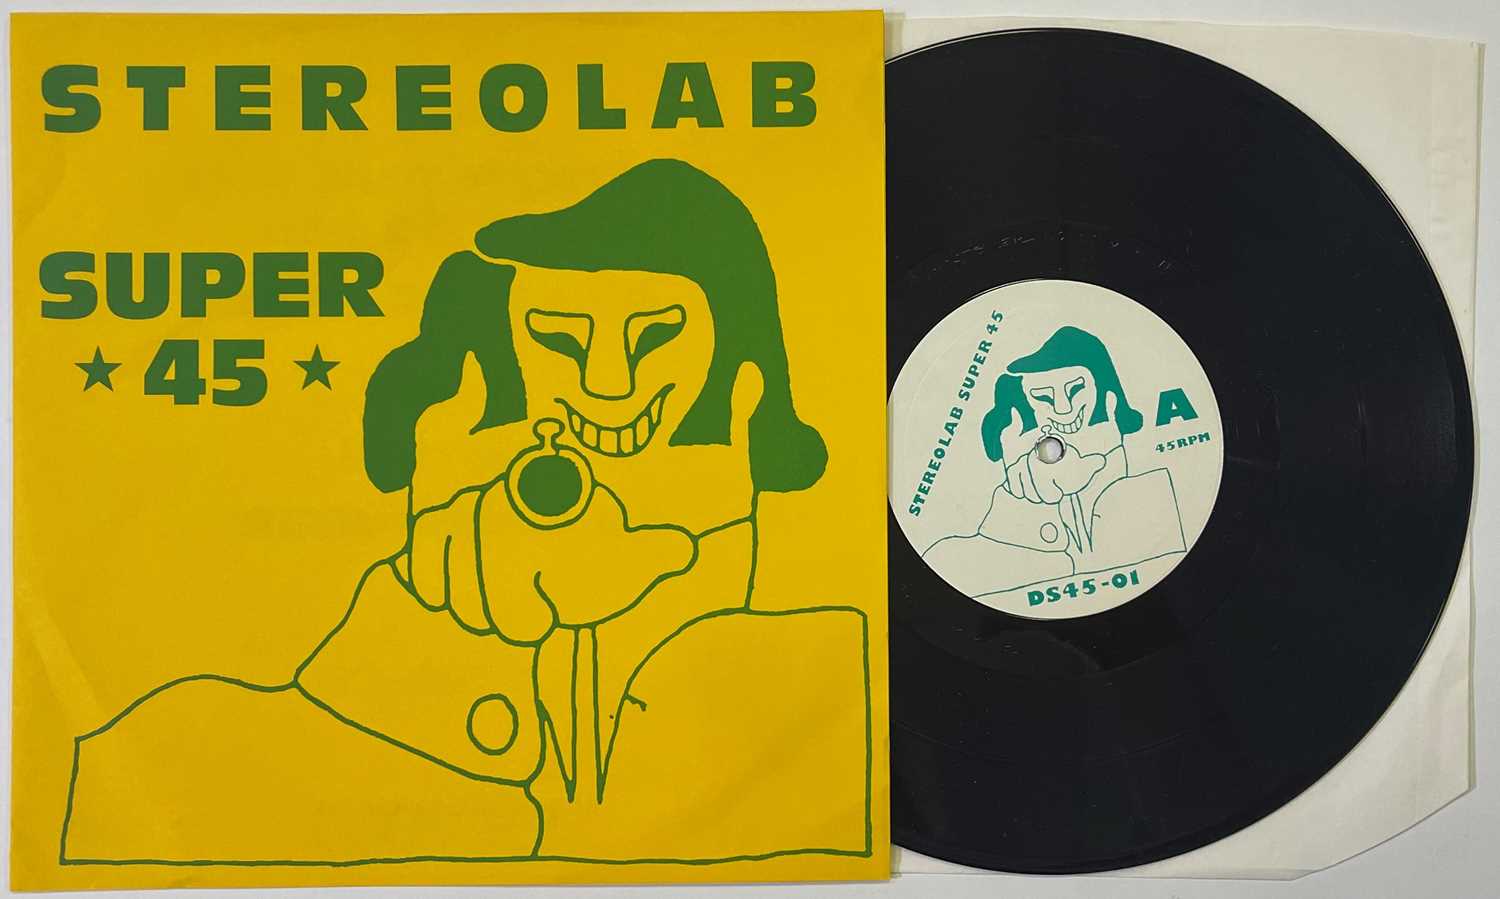 STEREOLAB - SUPER 45 - ORIGINAL UK 10" RELEASE (DUOPHONIC RECORDS DS 45-01)